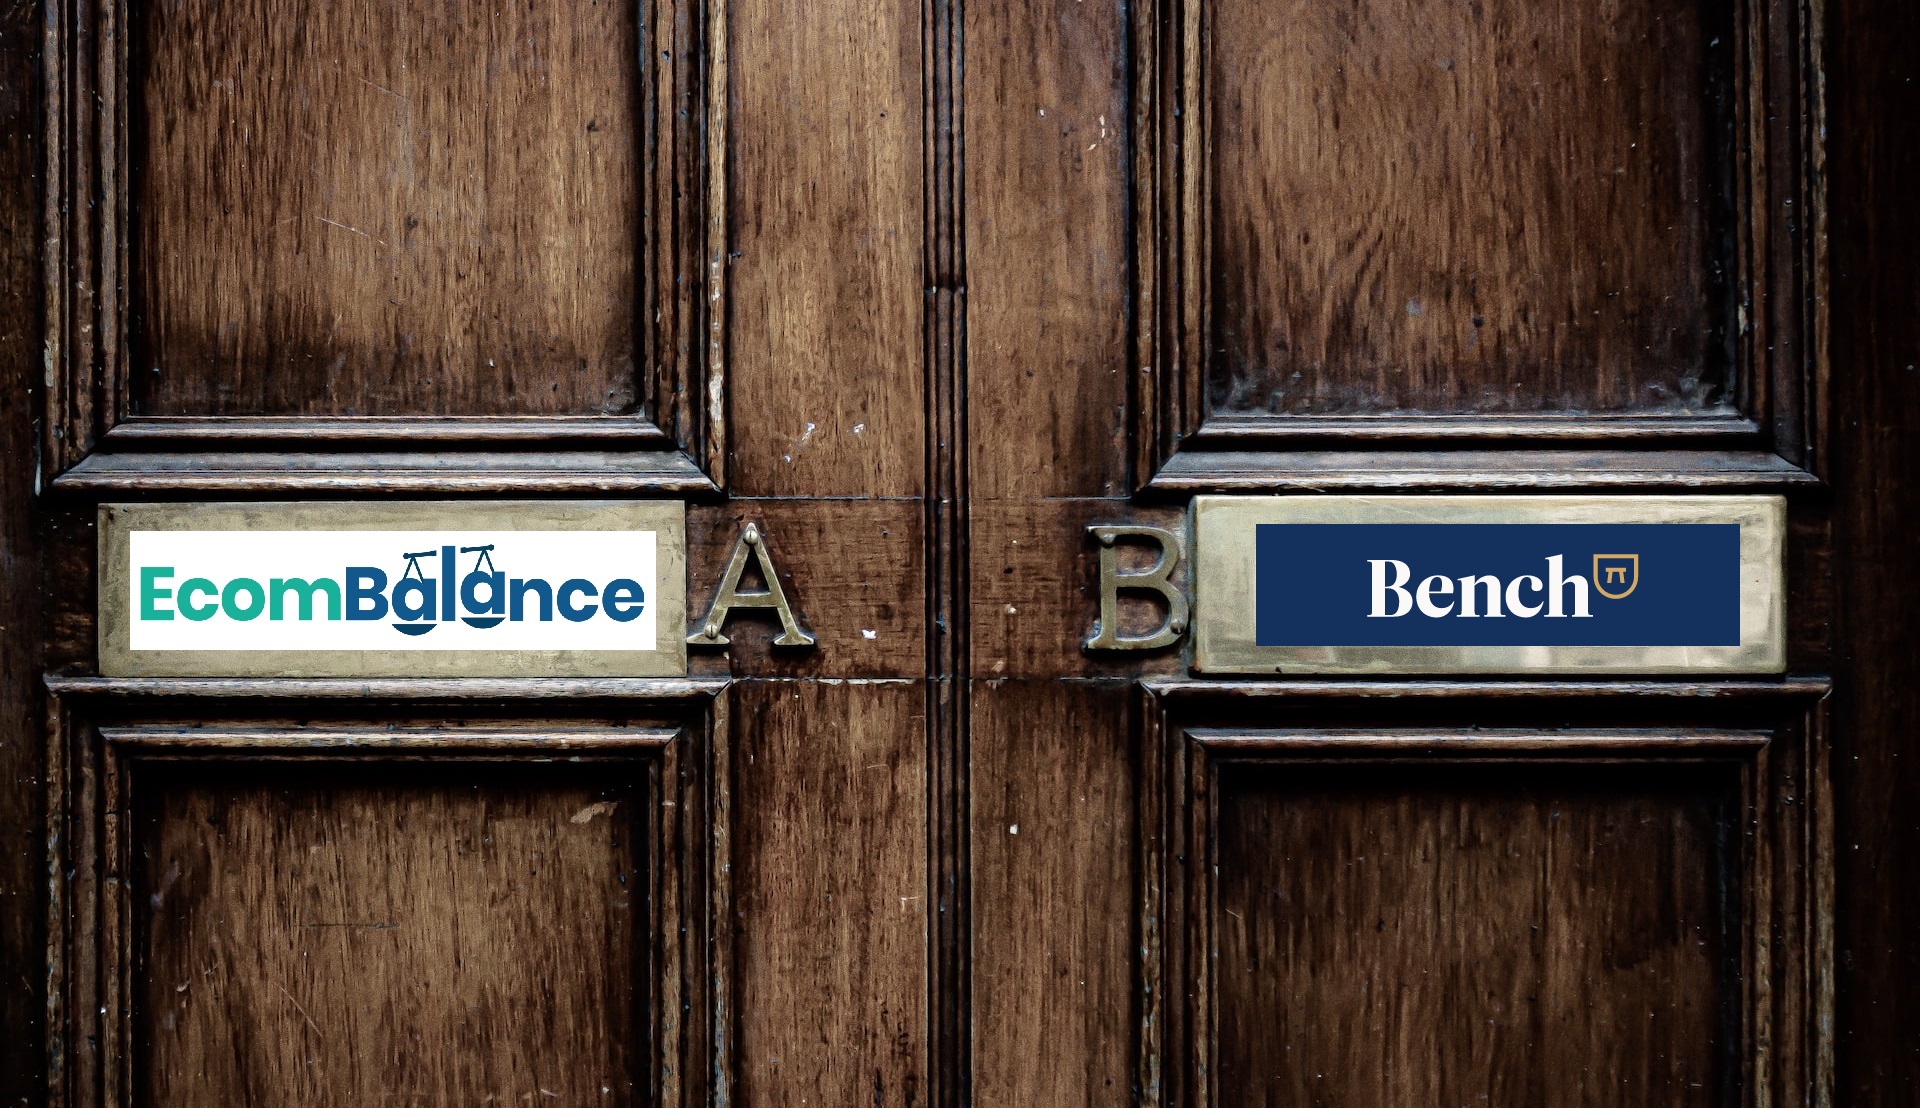 An image of two doors showing EcomBalance vs Bench